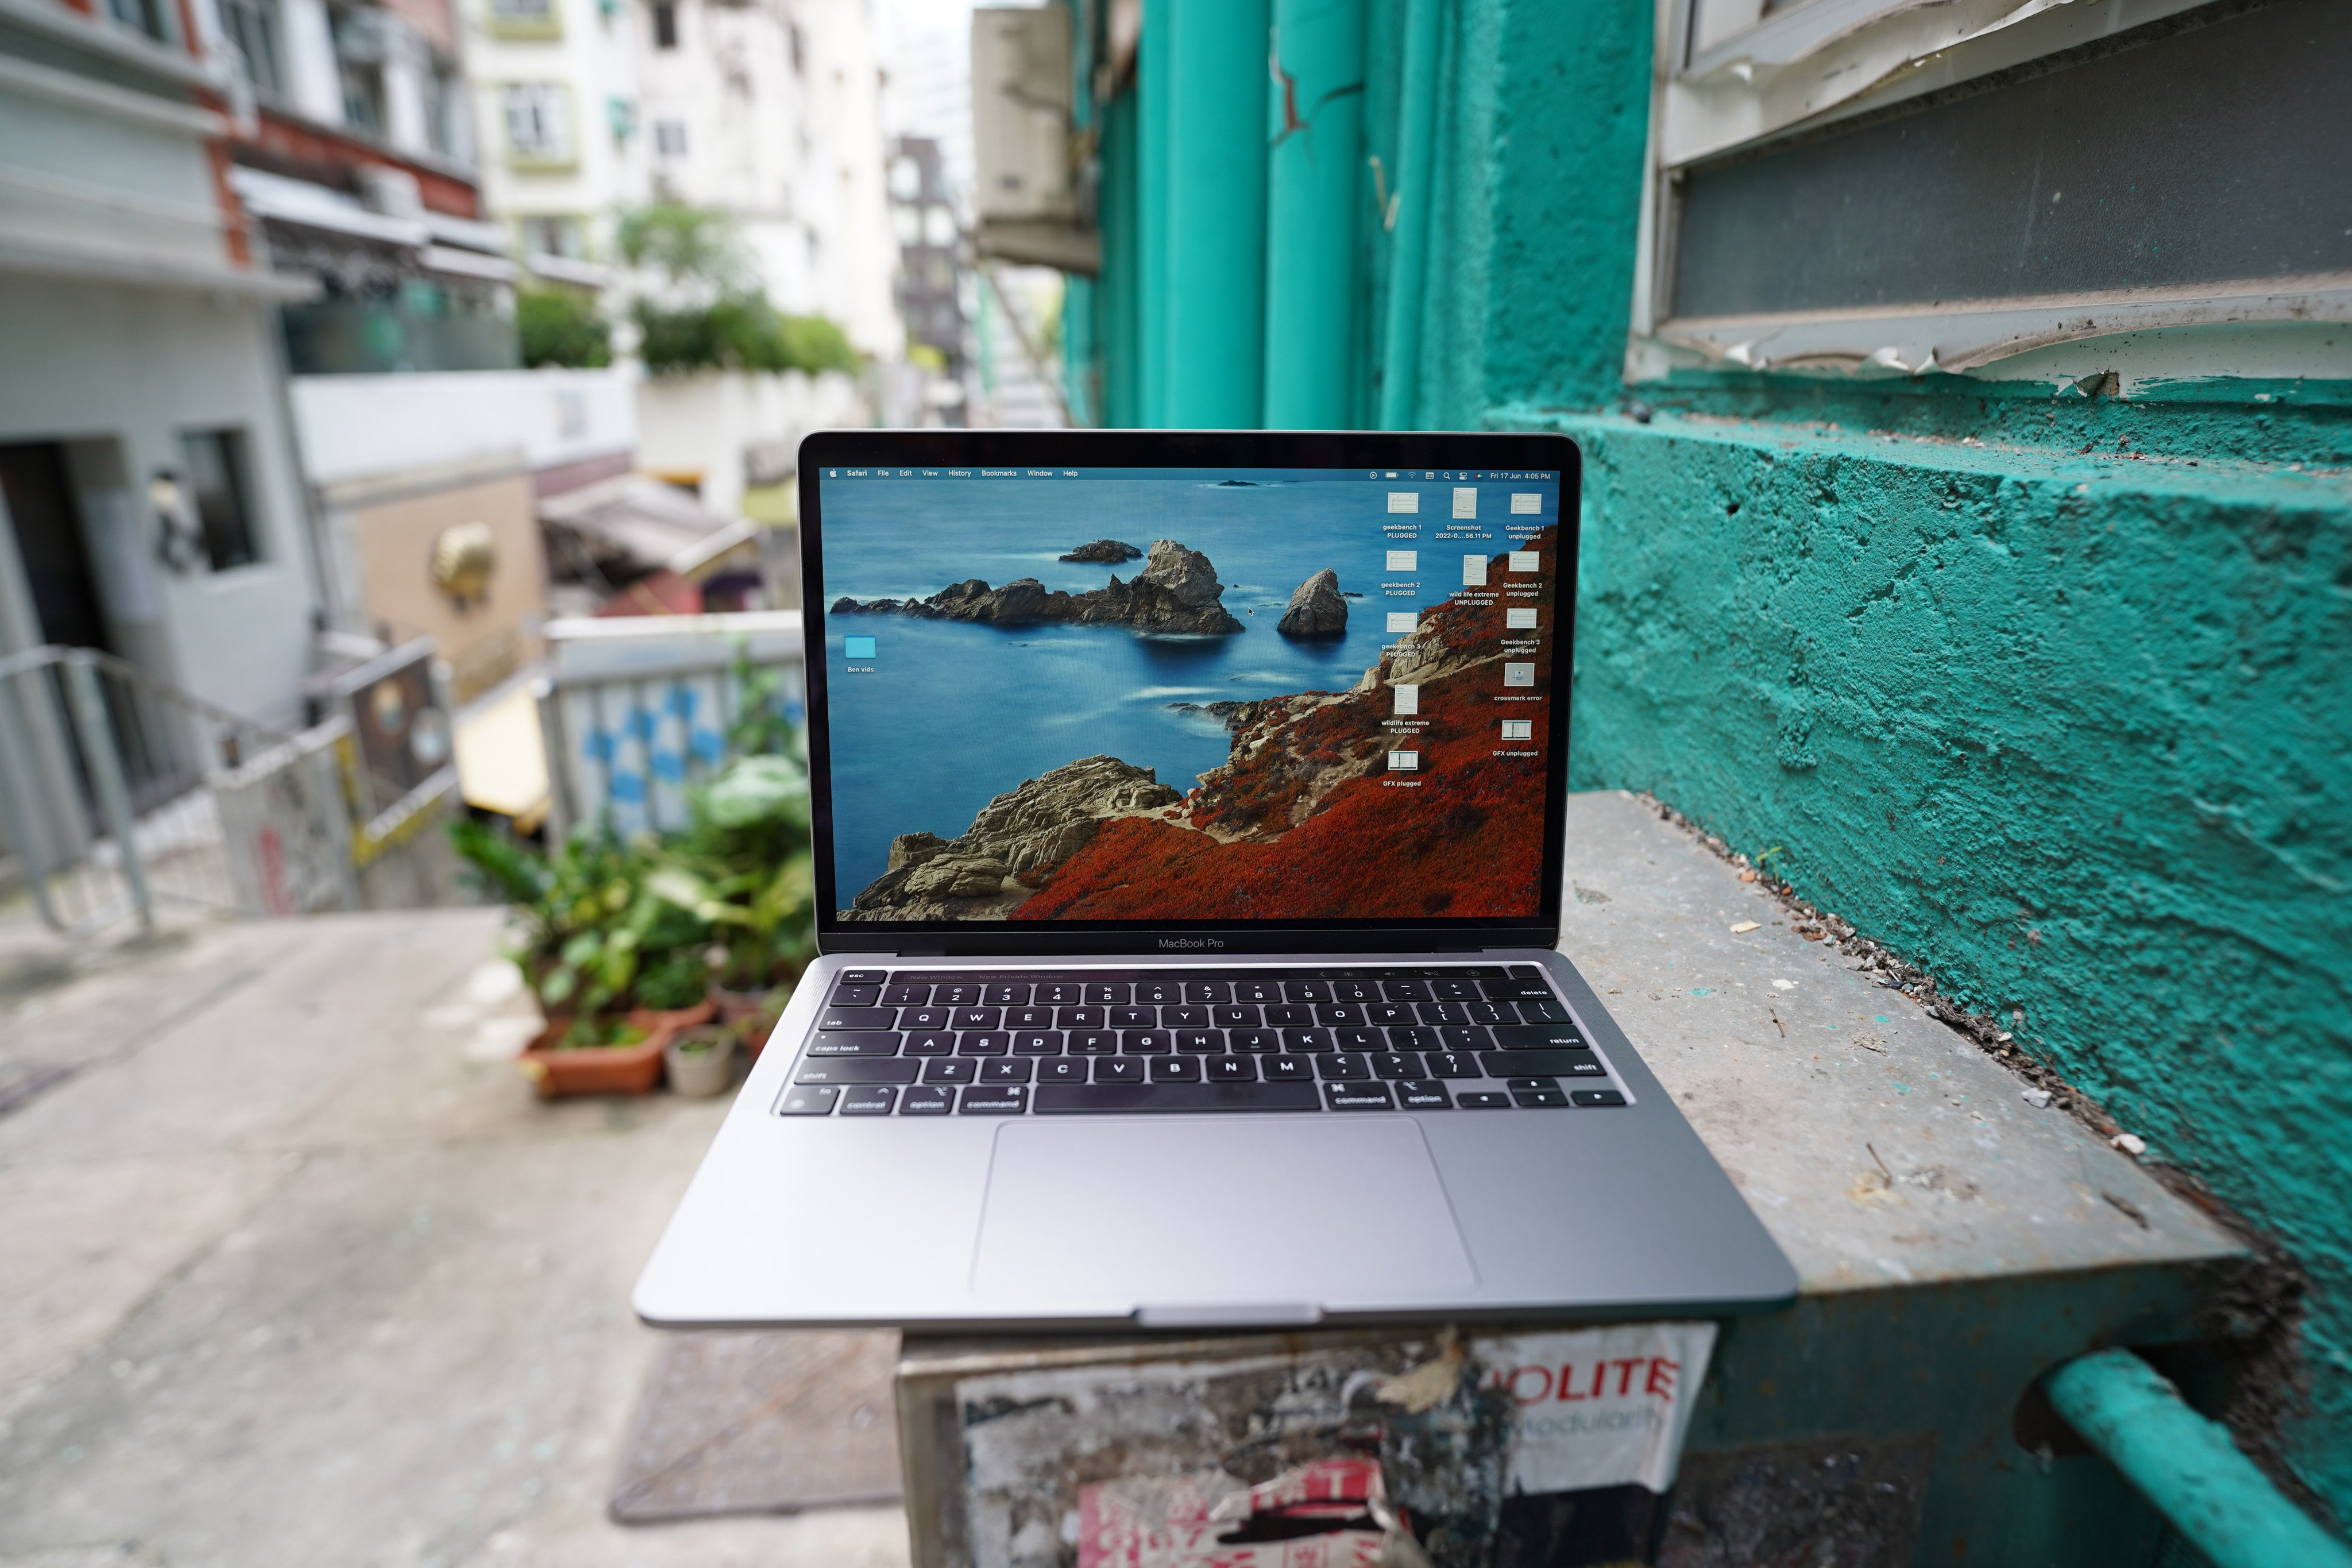 The 13-inch MacBook Pro M2 2022 offers excellent performance and battery life at an affordable price for entry- or mid-level creative professionals.